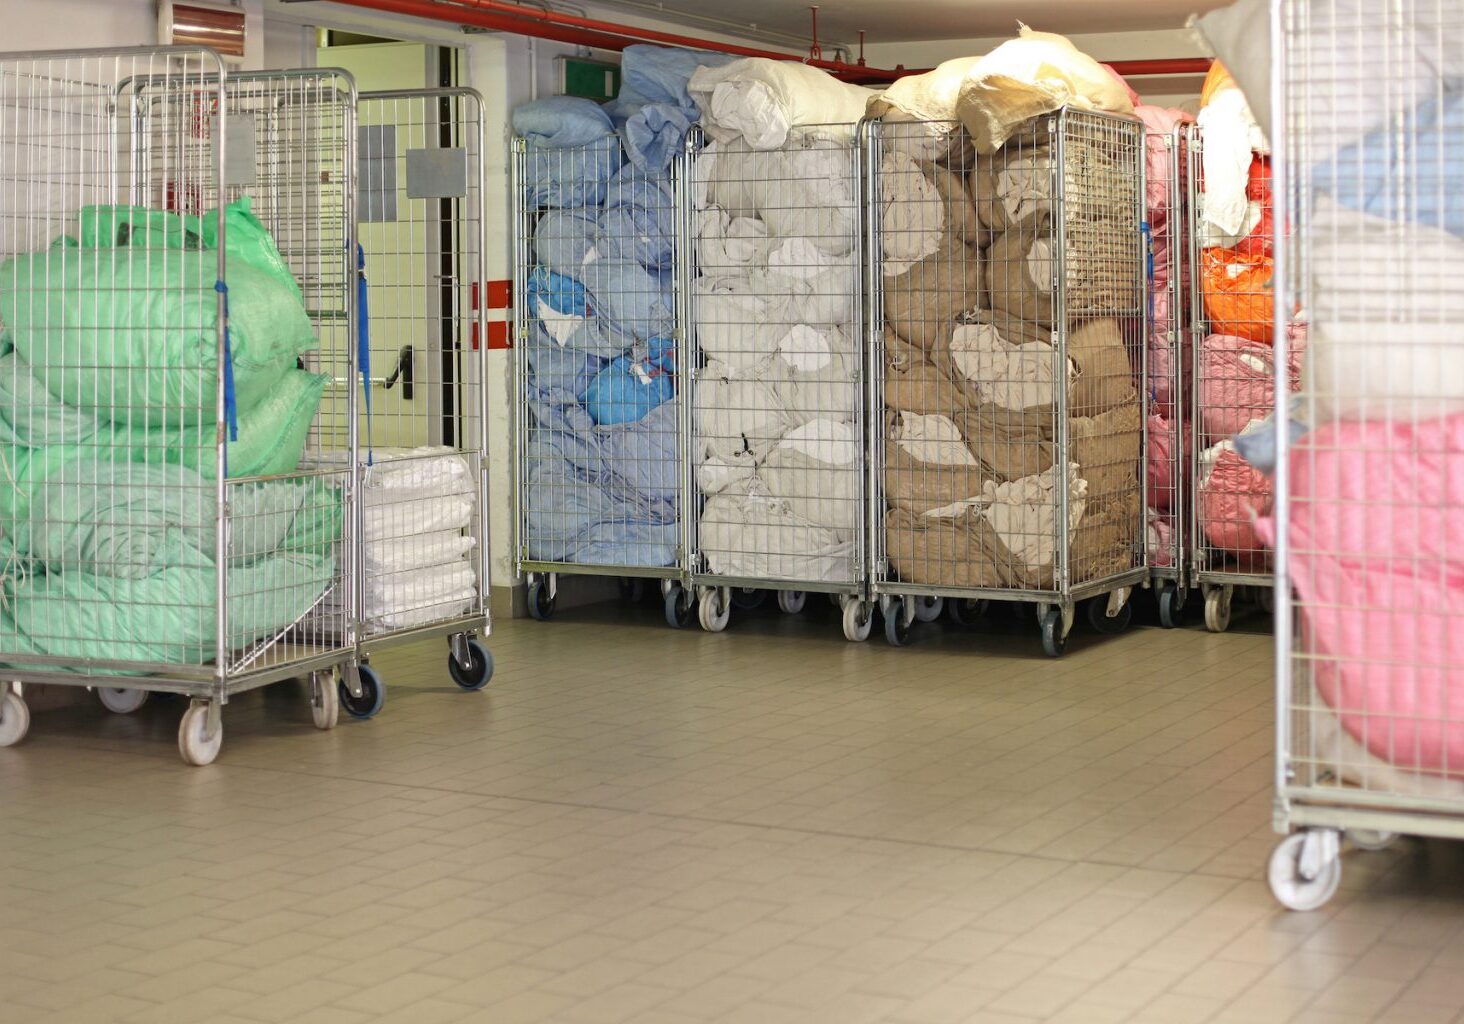 Bags With Dirty Laundry Sheets in Rolling Carts